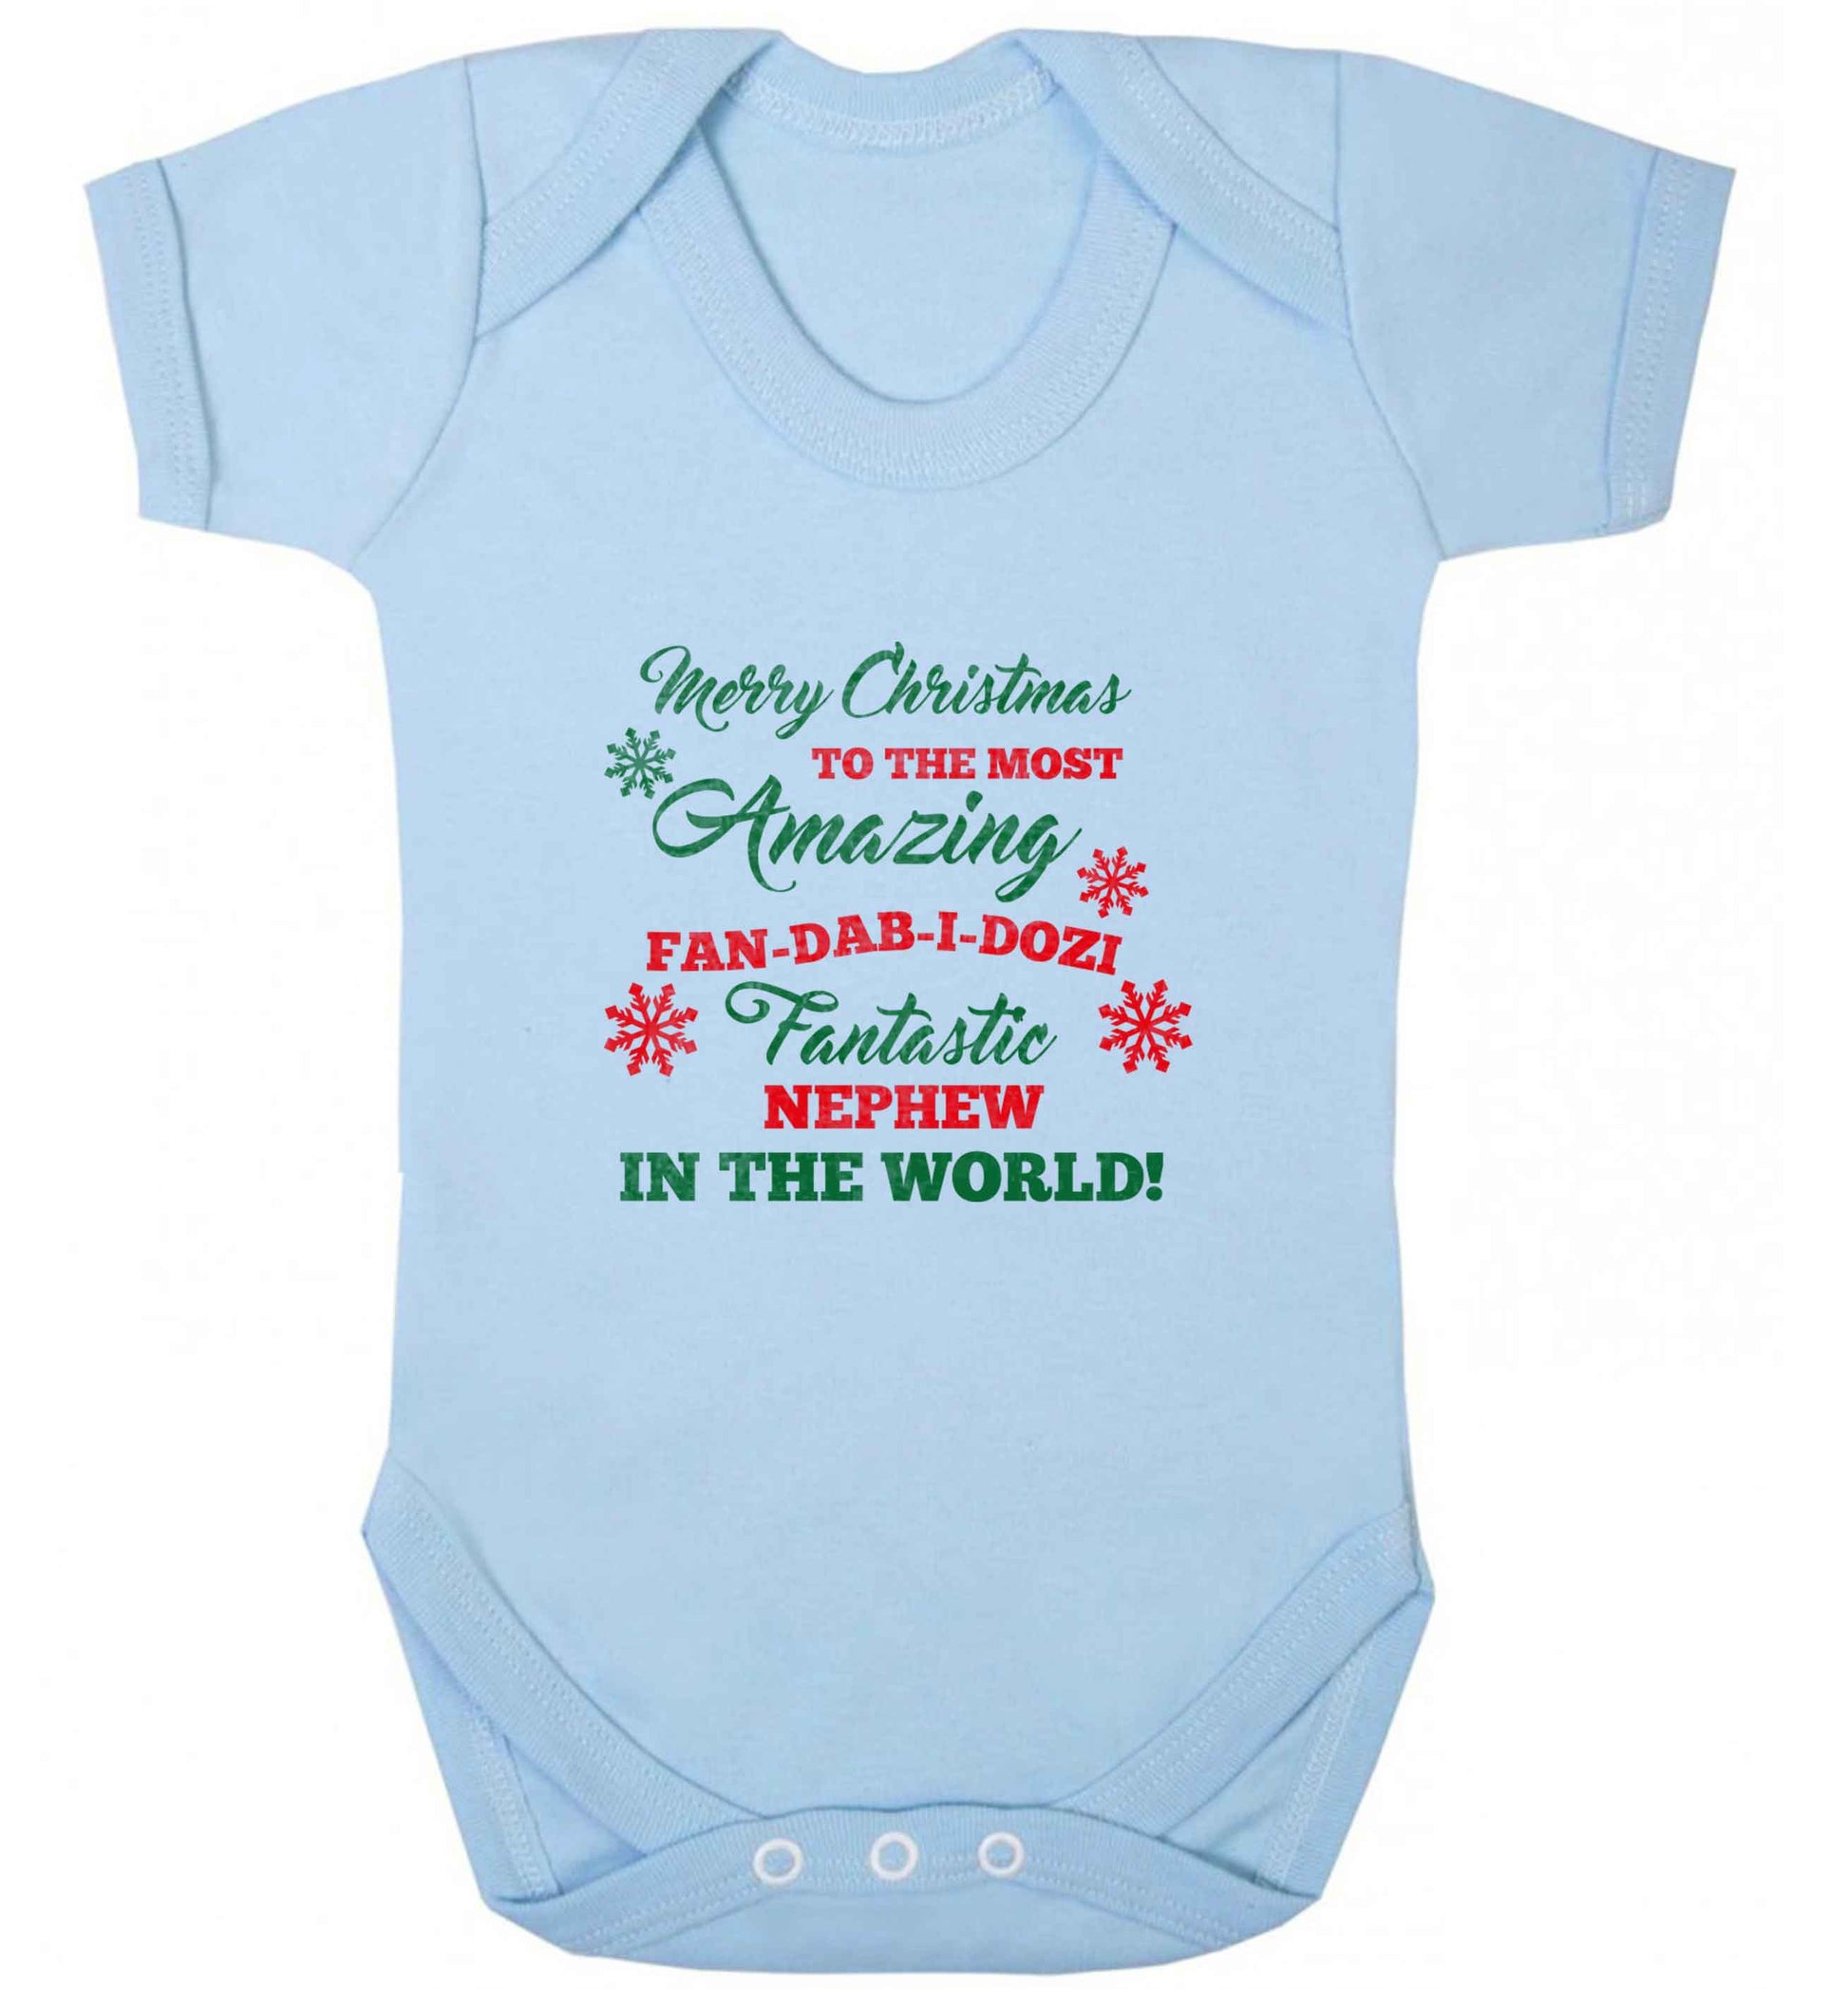 Merry Christmas to the most amazing fan-dab-i-dozi fantasic Nephew in the world baby vest pale blue 18-24 months